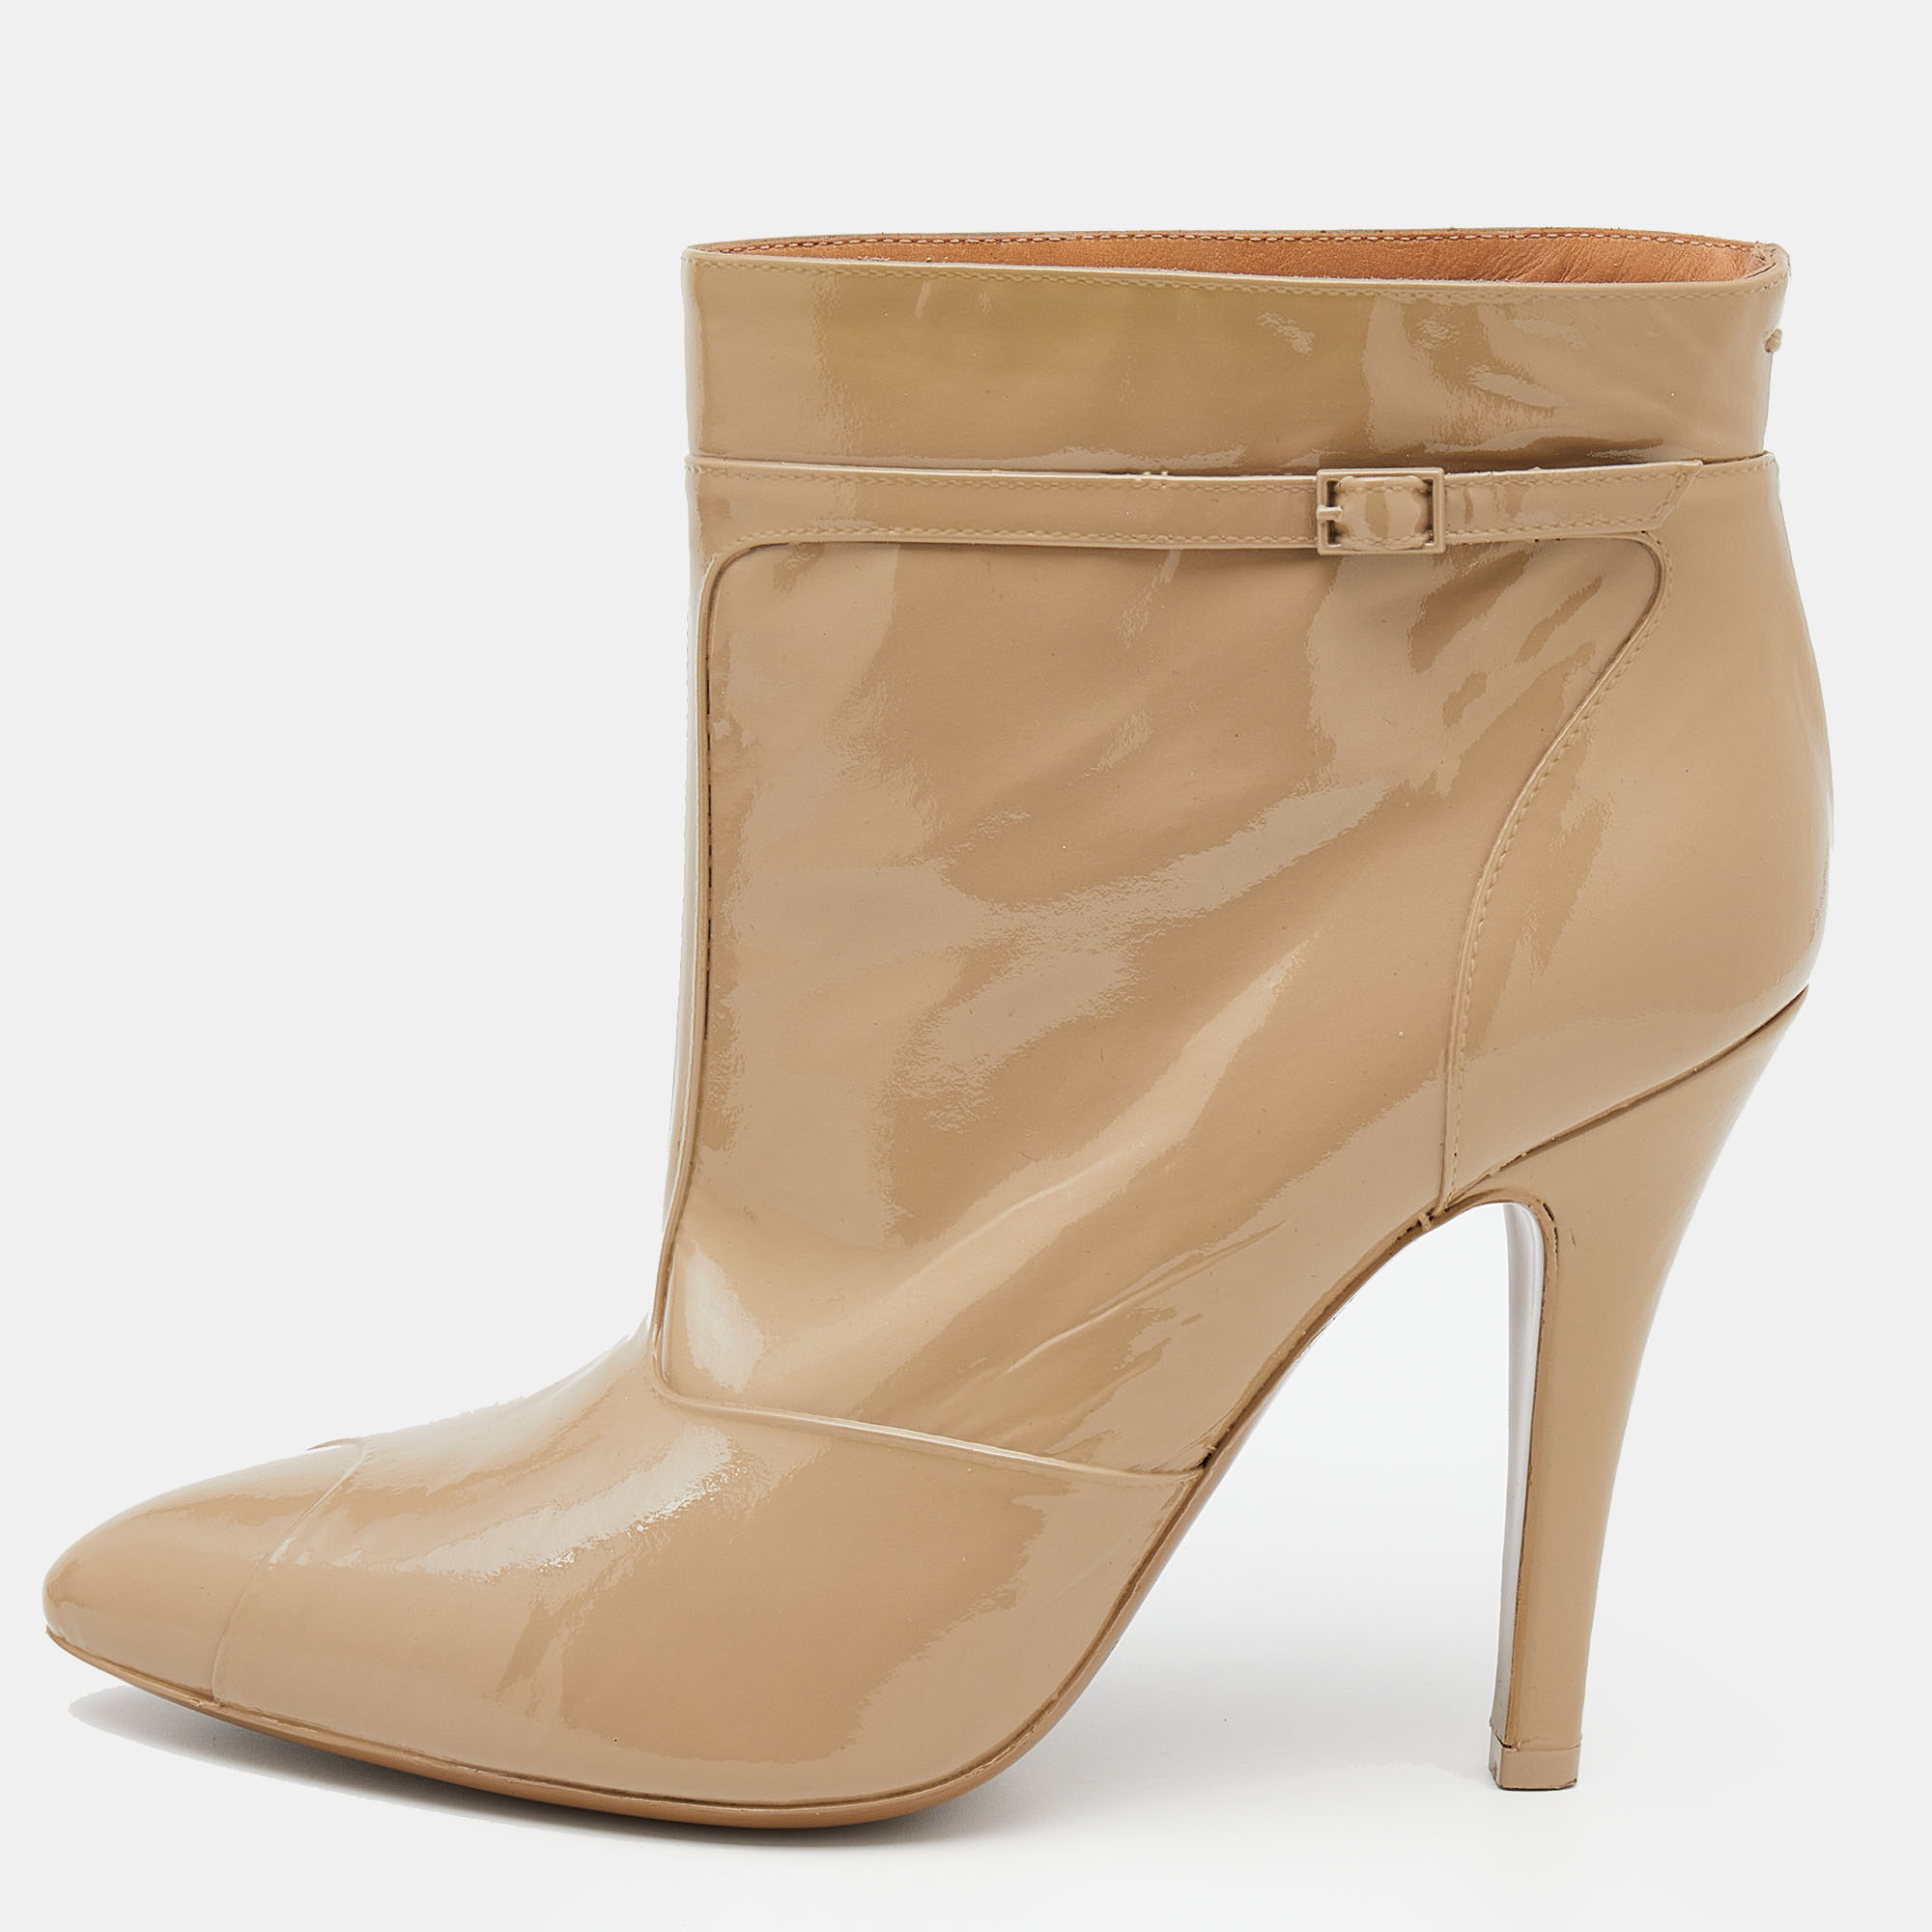 Beige Patent Leather Ankle Boots